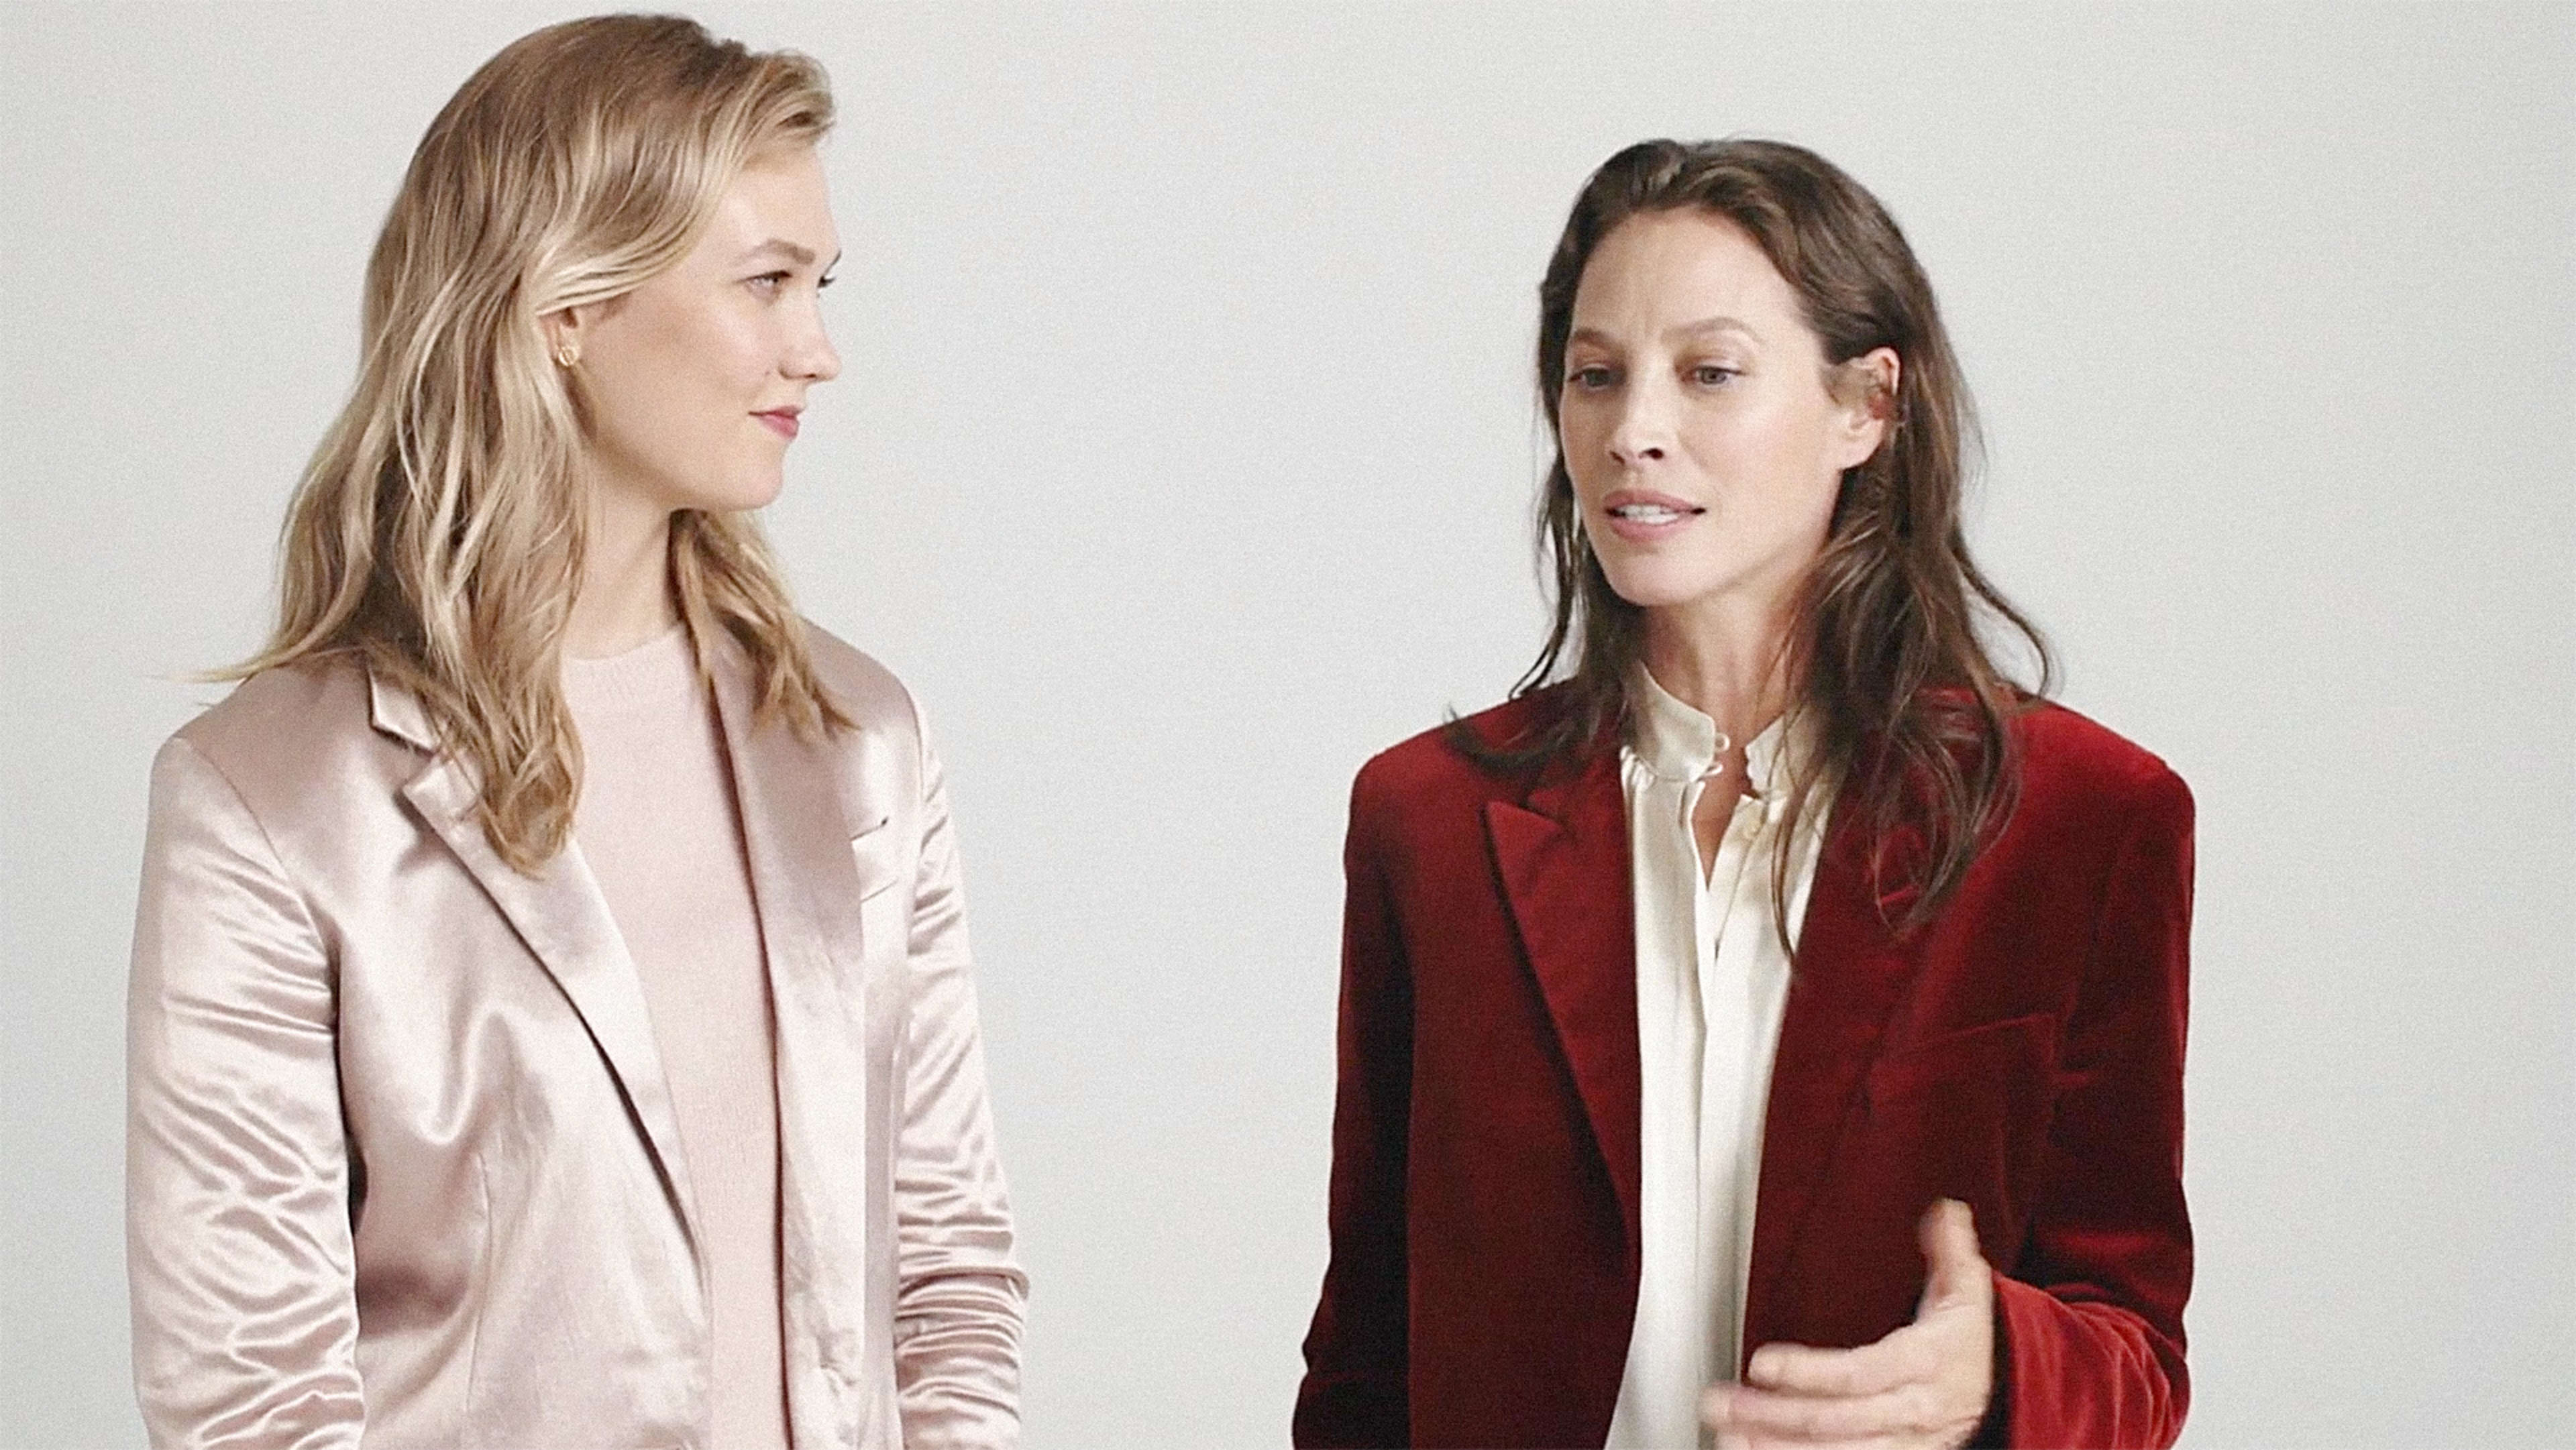 Karlie Kloss And Christy Turlington Burns Tell “Extraordinary Stories” For Cole Haan